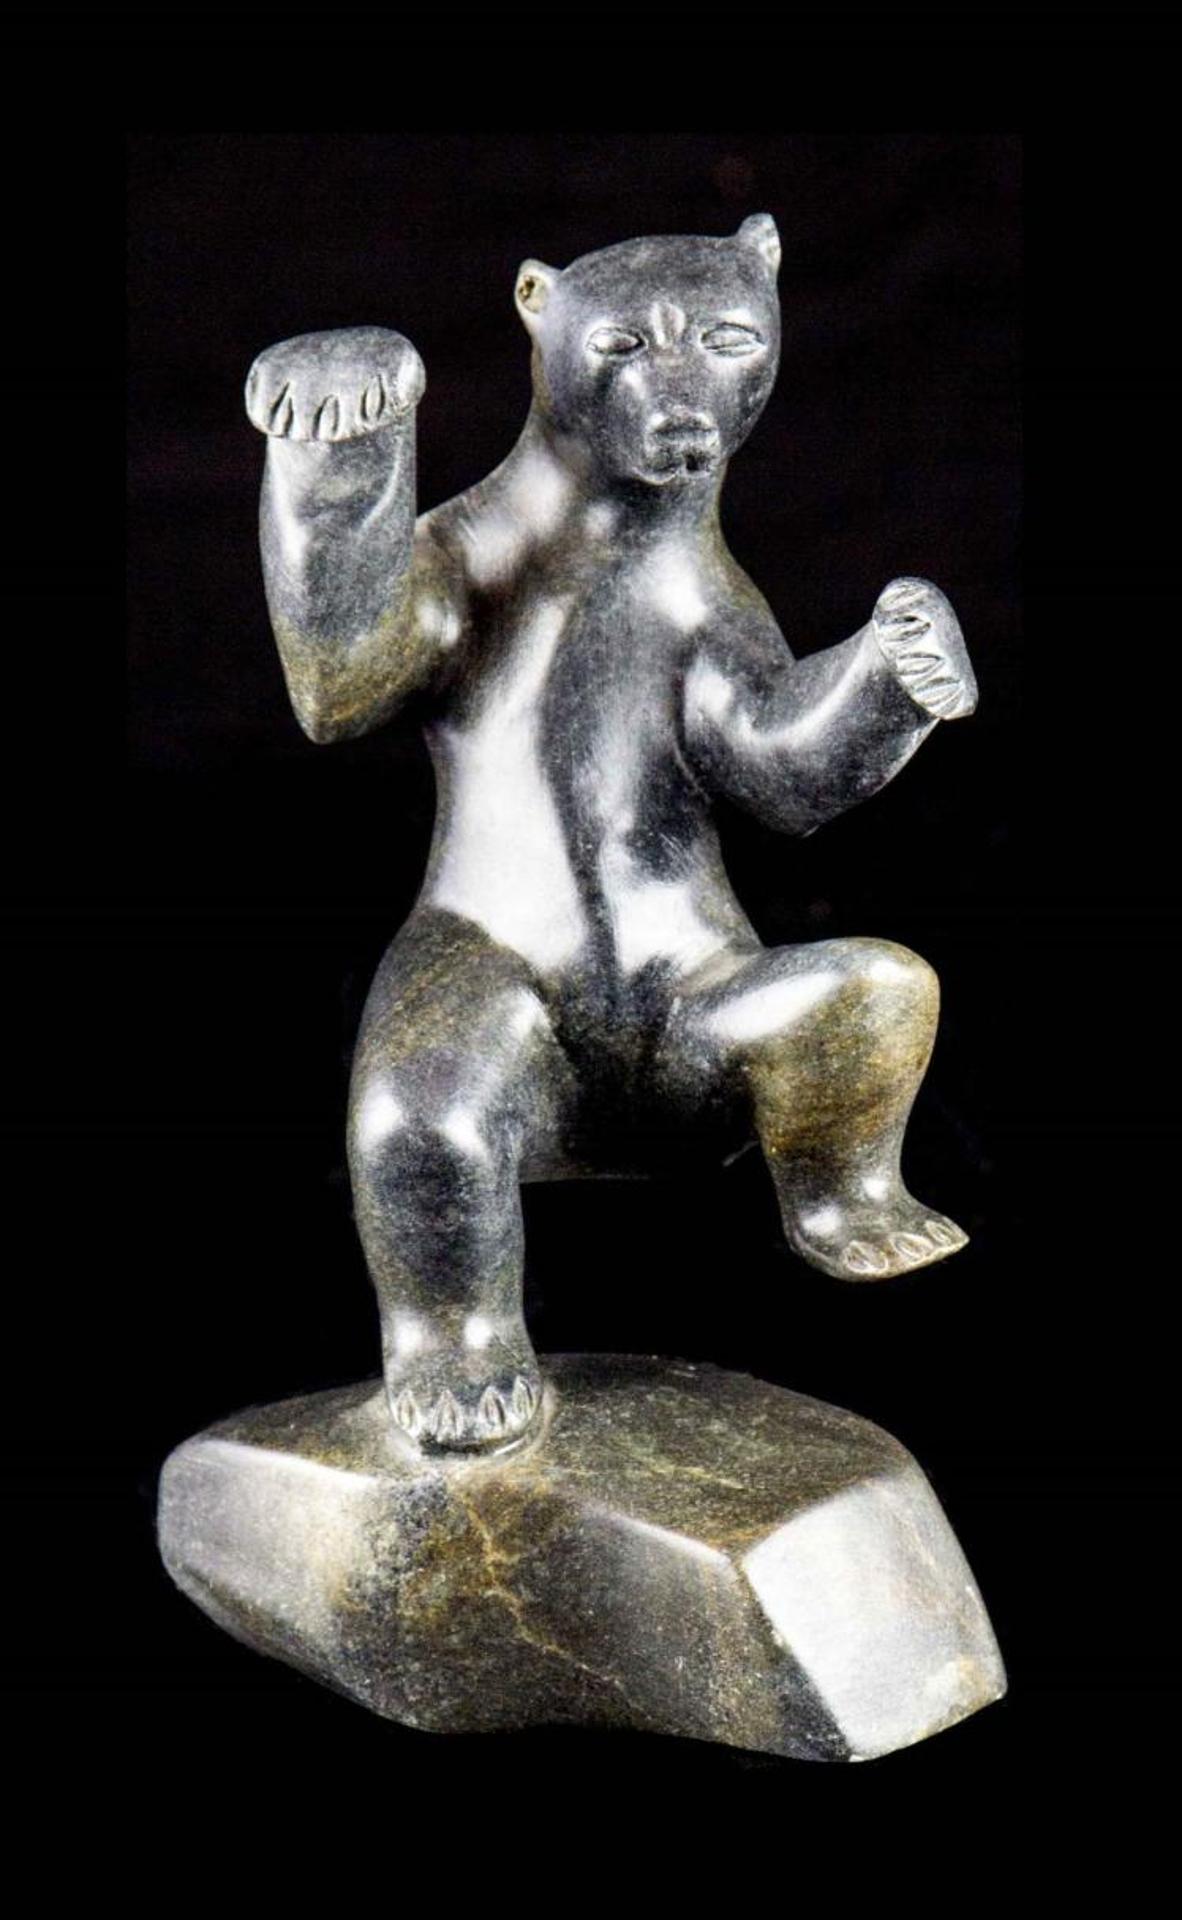 Eric [Amiraq] Lester (1966) - a grey stone carving of a dancing bear